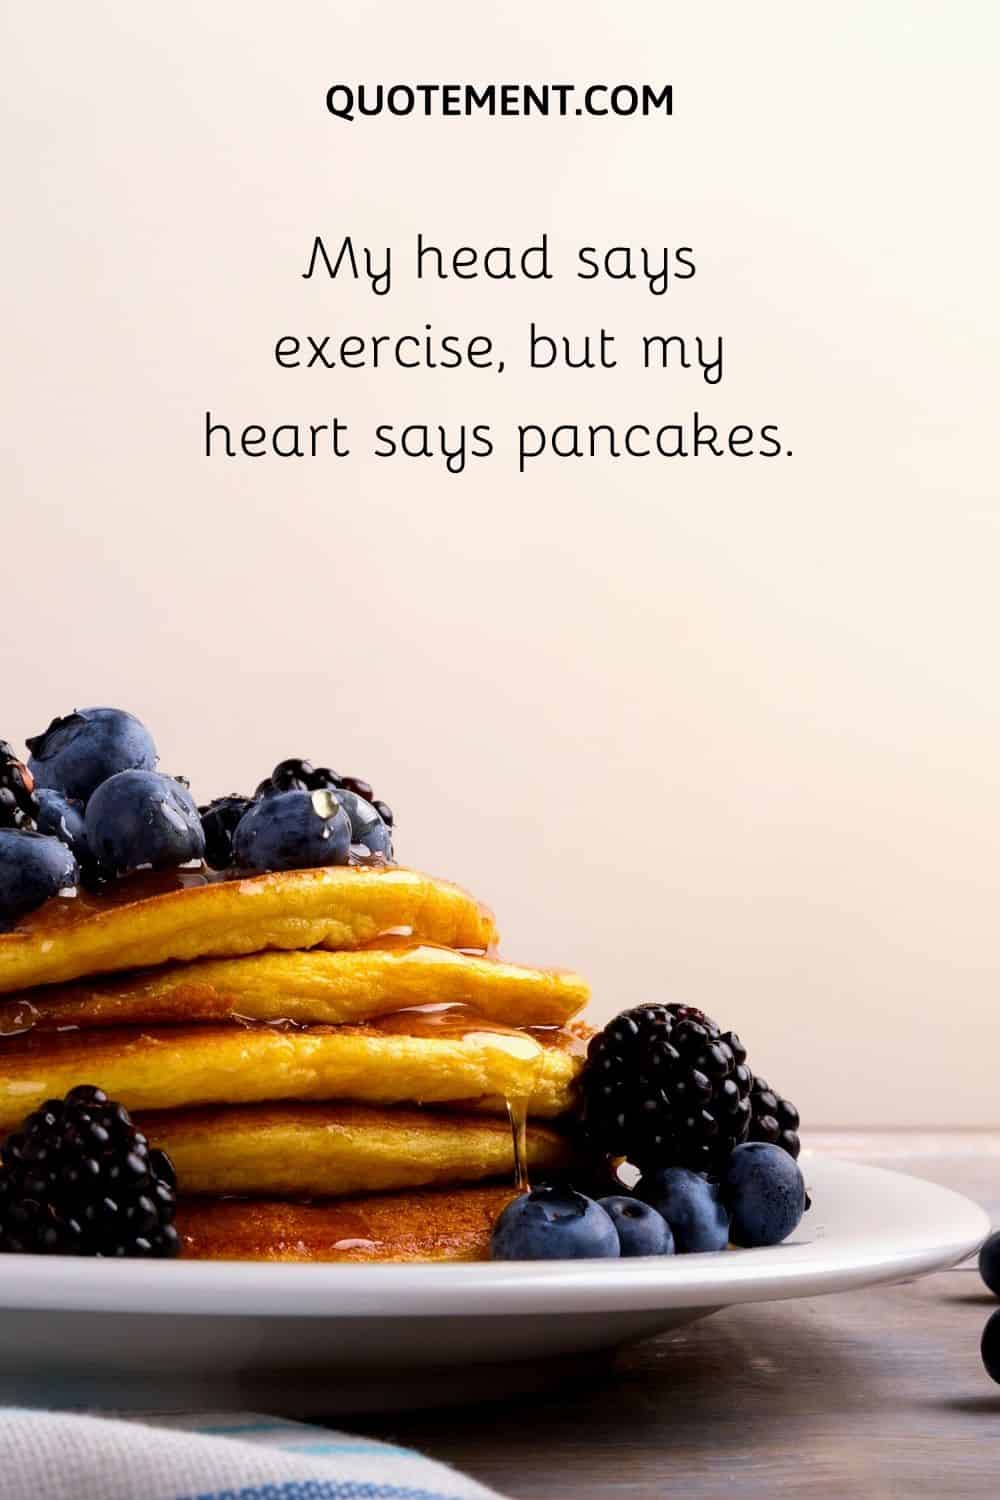 My head says exercise, but my heart says pancakes